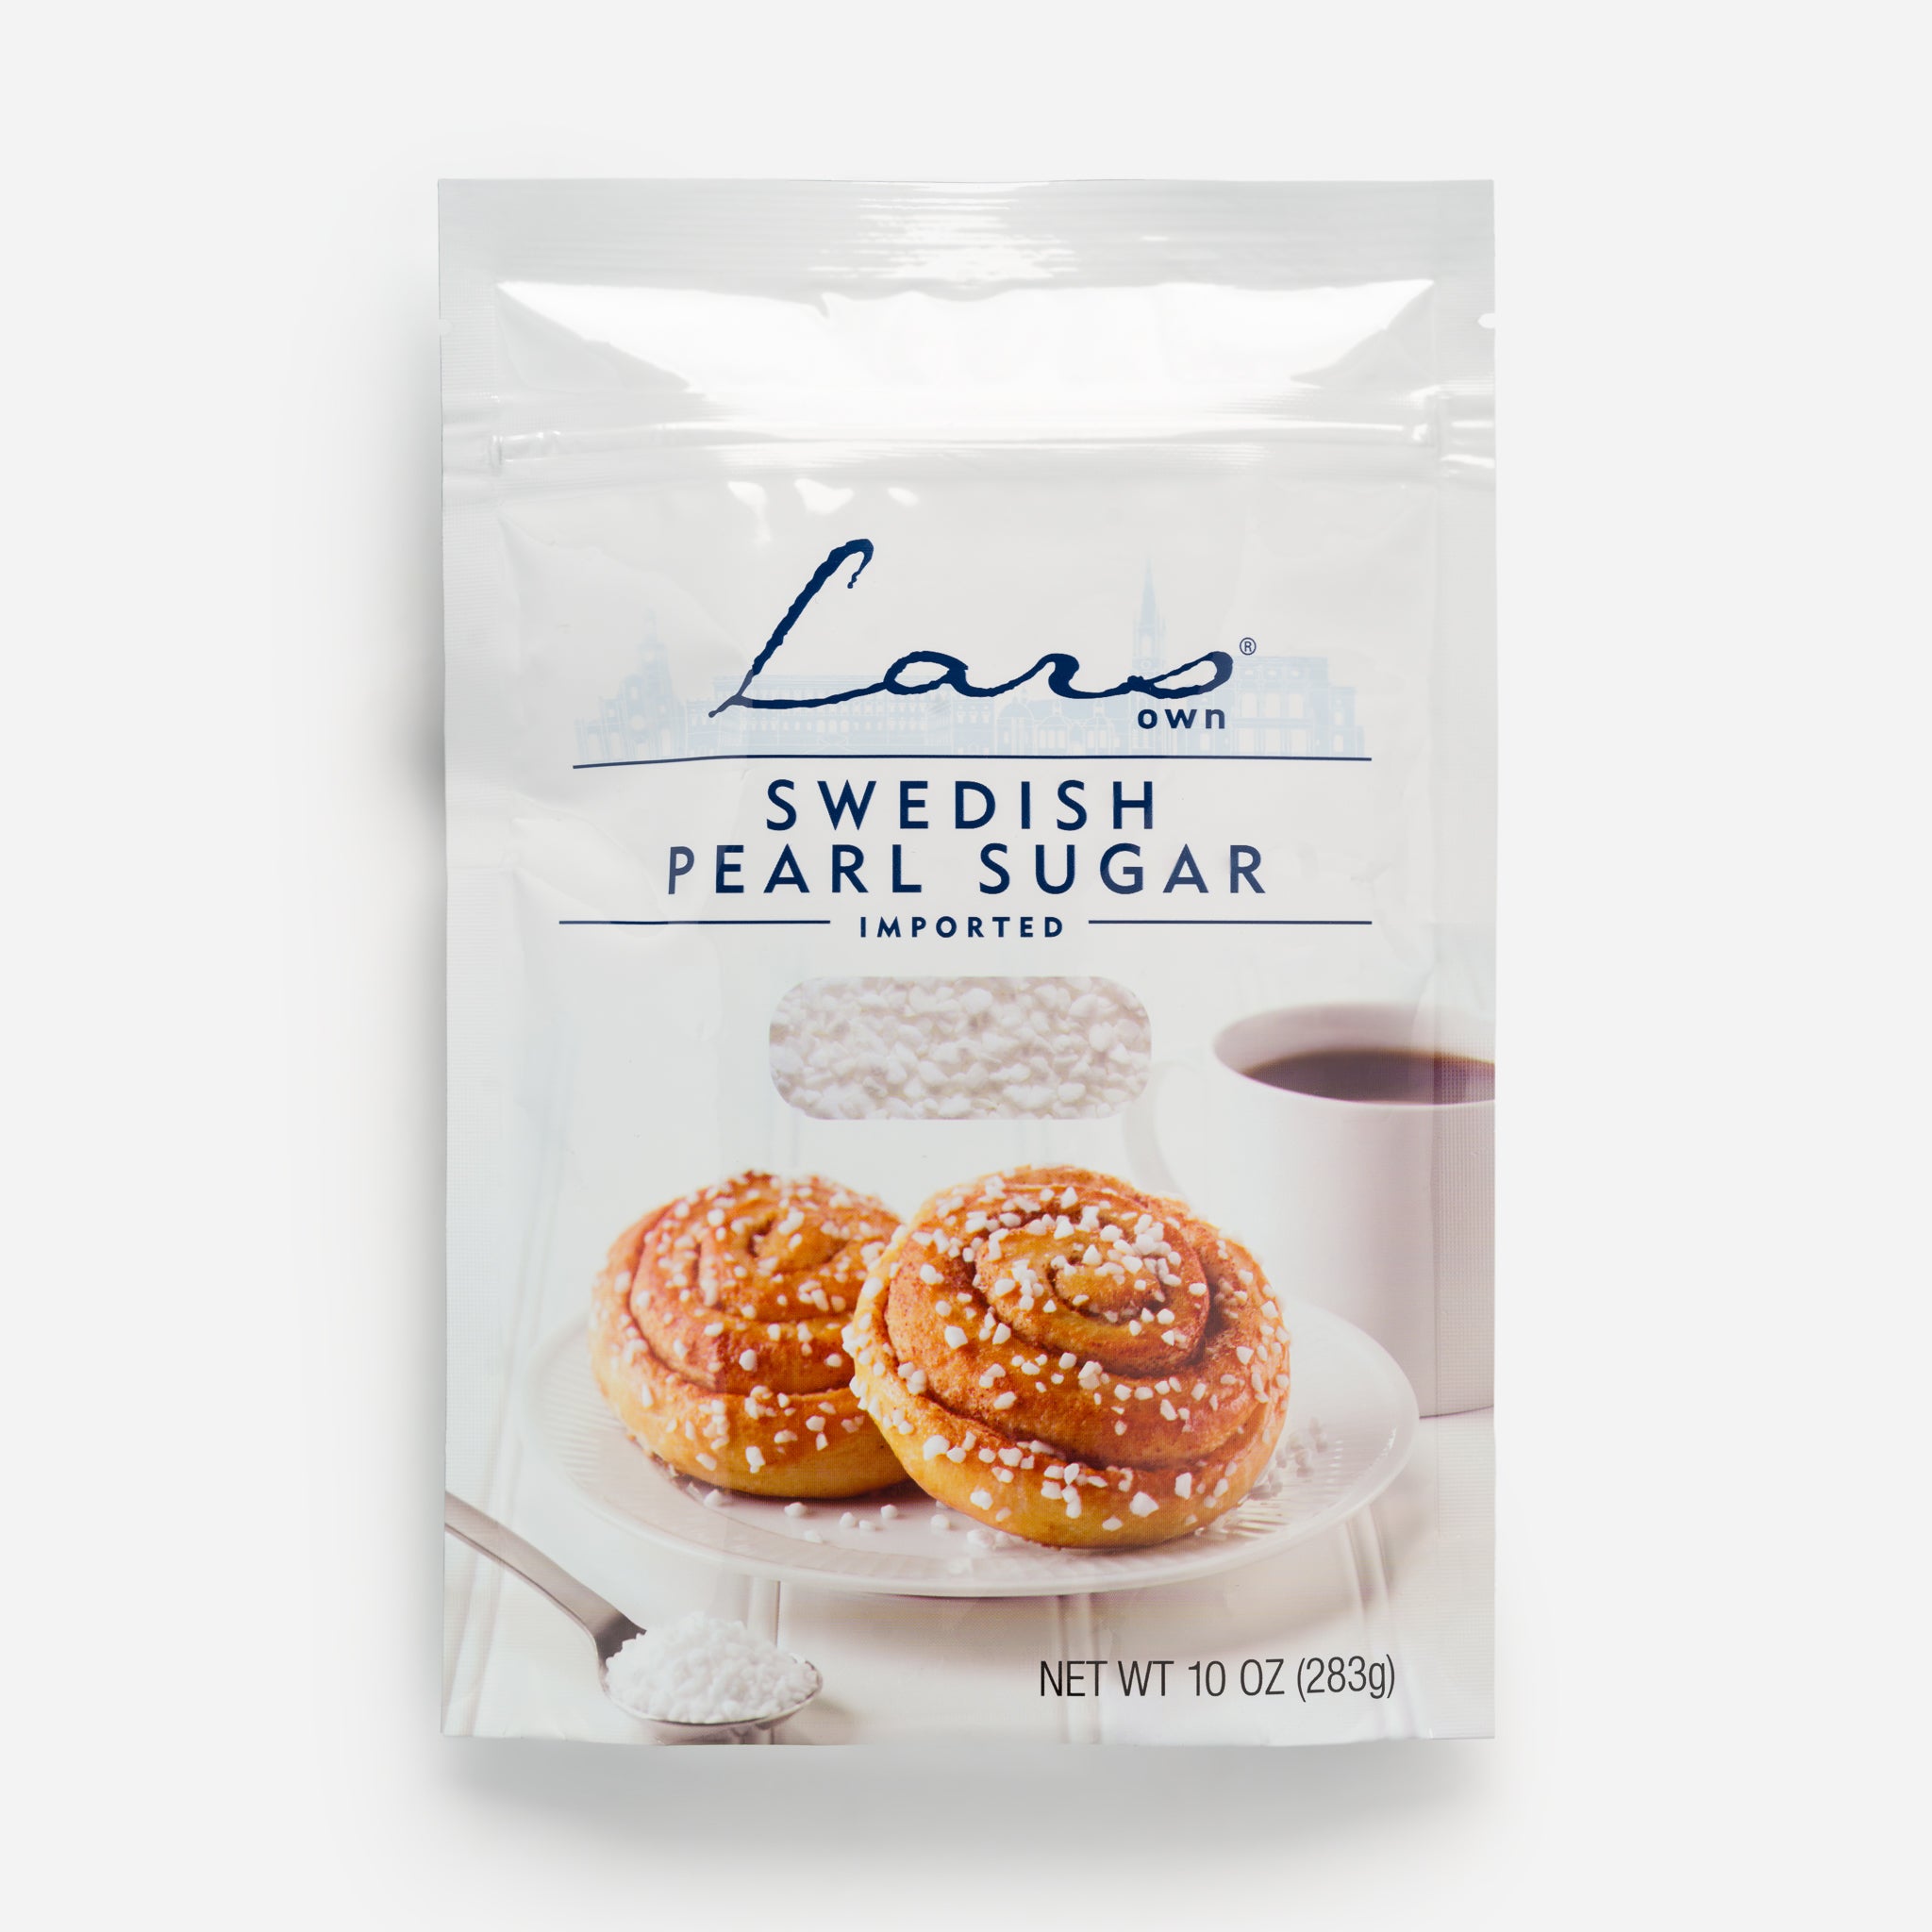 What Is Pearl Sugar, and How Is It Used?